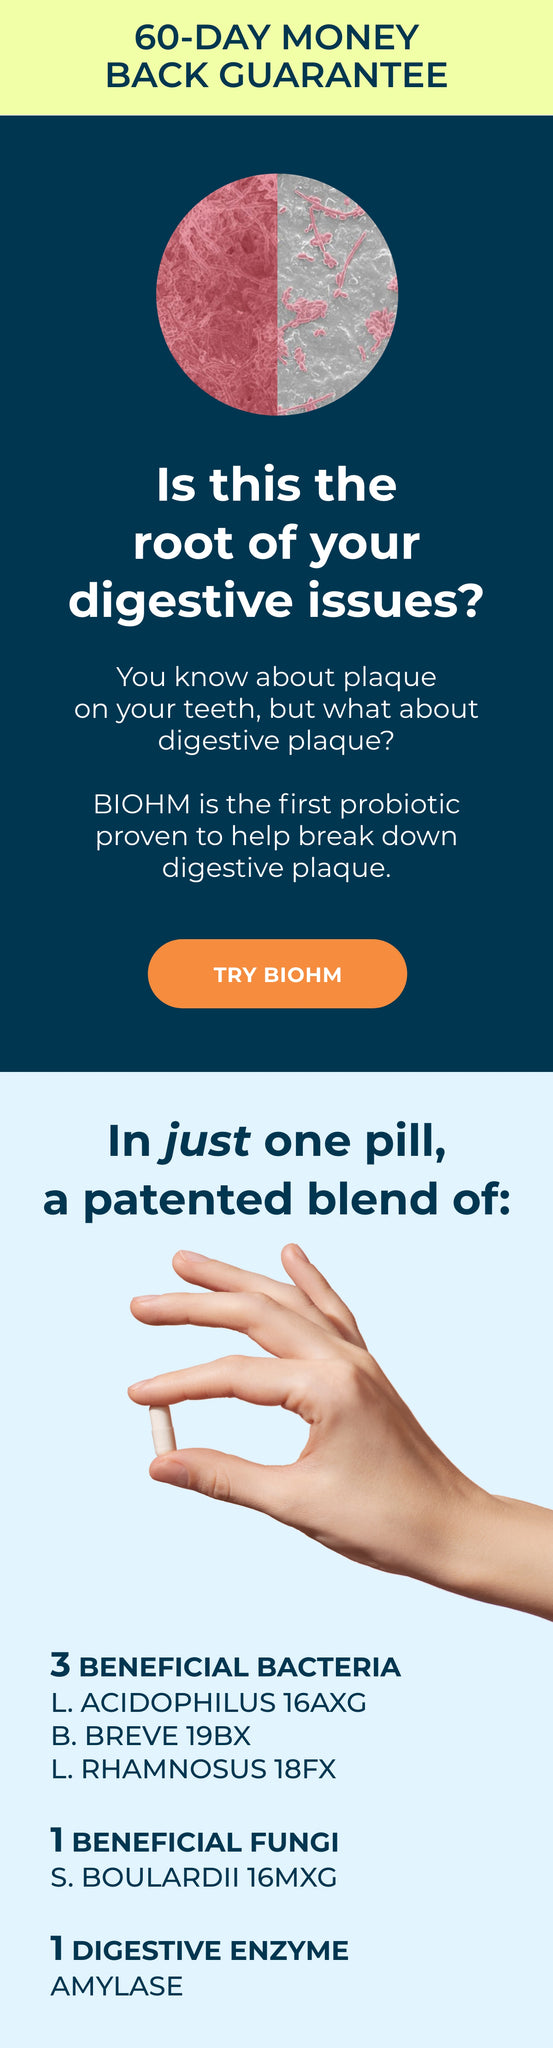 Digestive plaque and pill breakdown